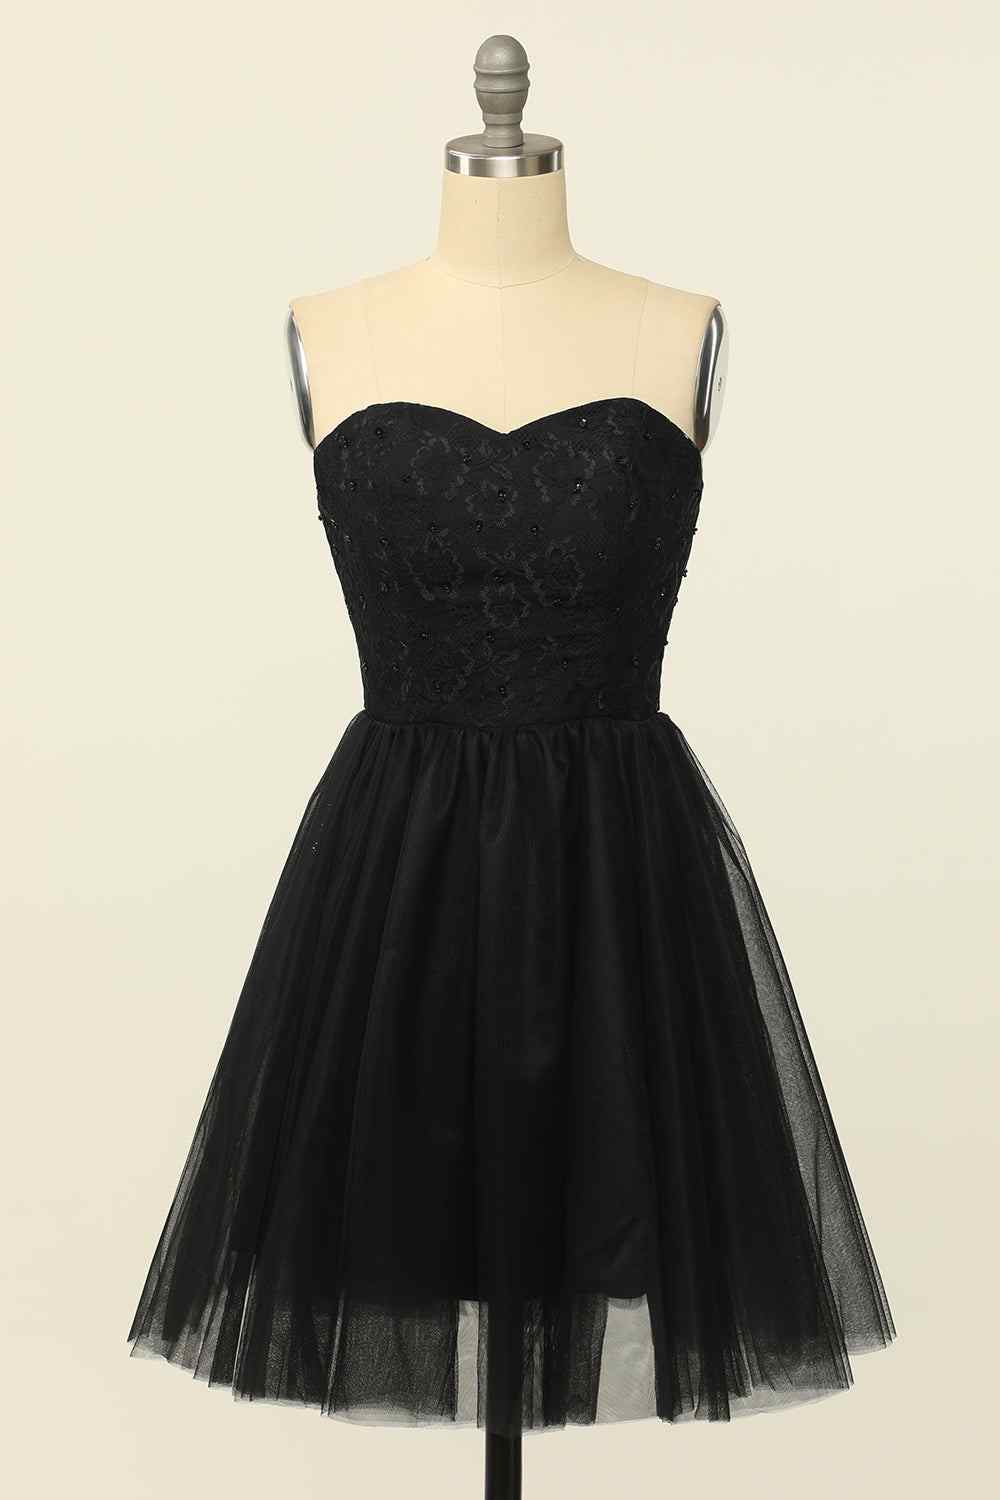 Black A-line Strapless Lace Beaded Lace-Up Back Mini Homecoming Dress